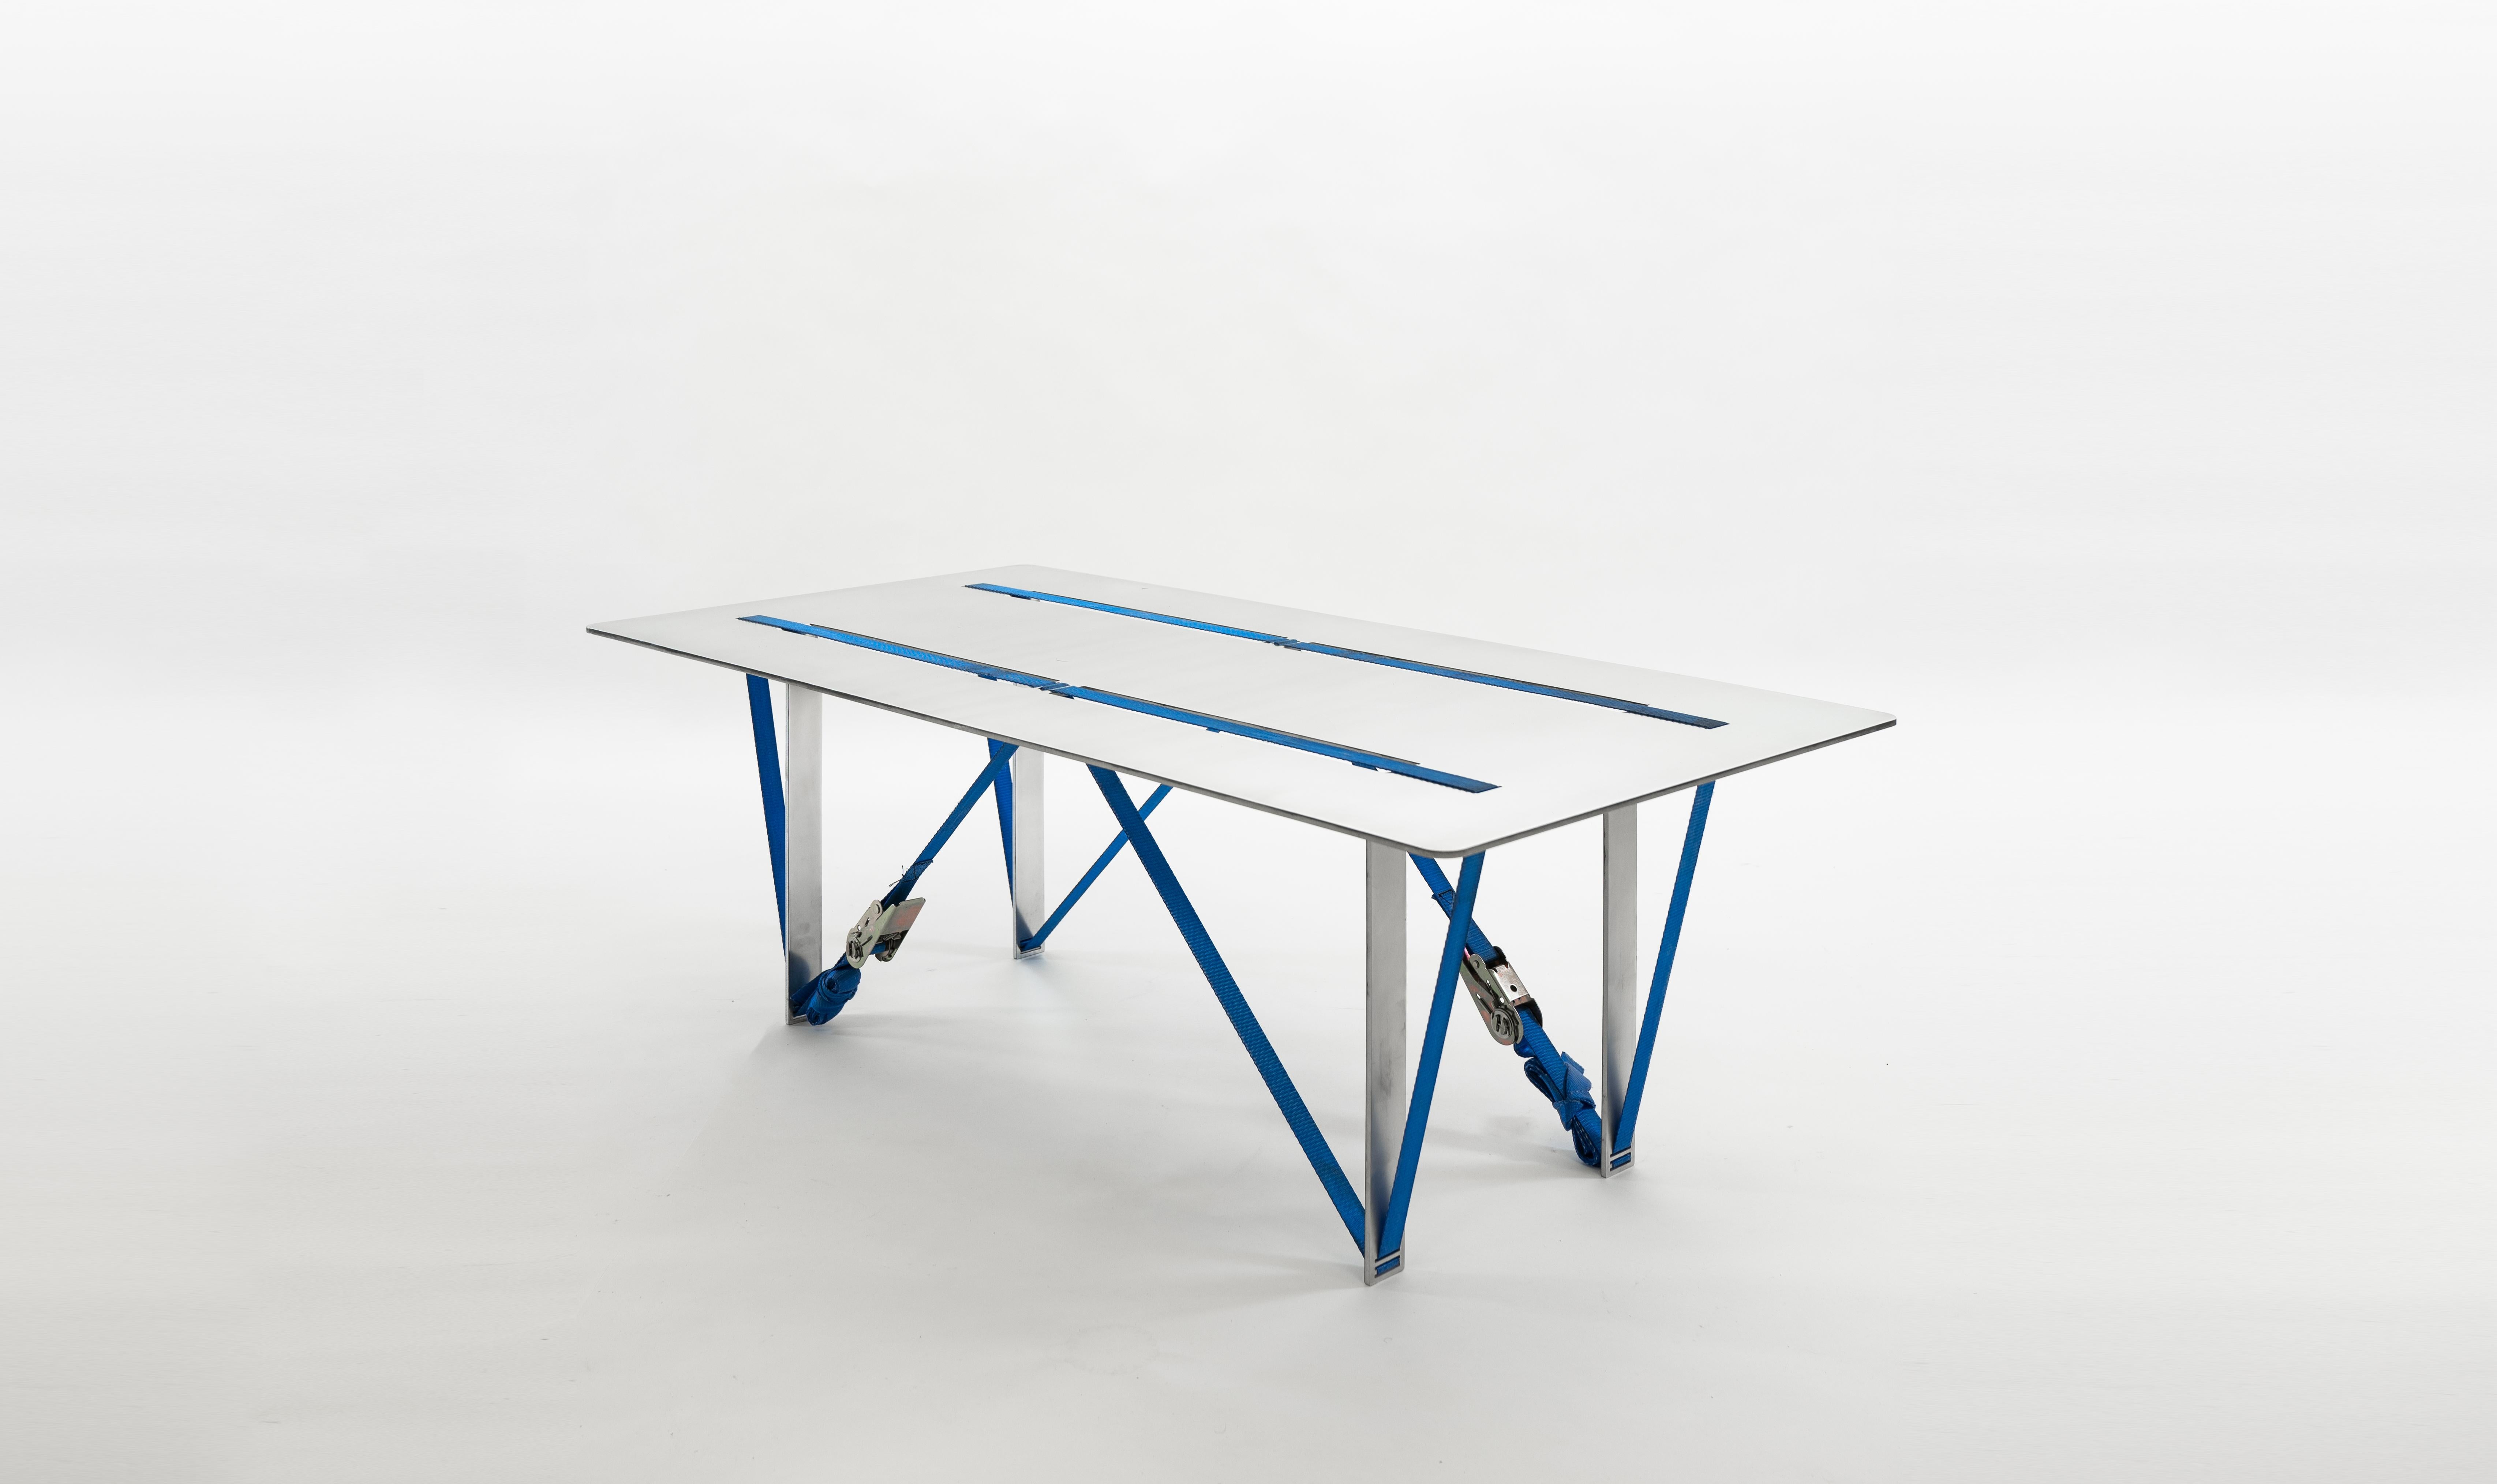 The Tighten table is range of household, display and exhibition tables each created from a single sheet of hand-polished, recycled aluminium, manually bent and tensioned with ratchet straps. The series originates as a study into manufacturing a